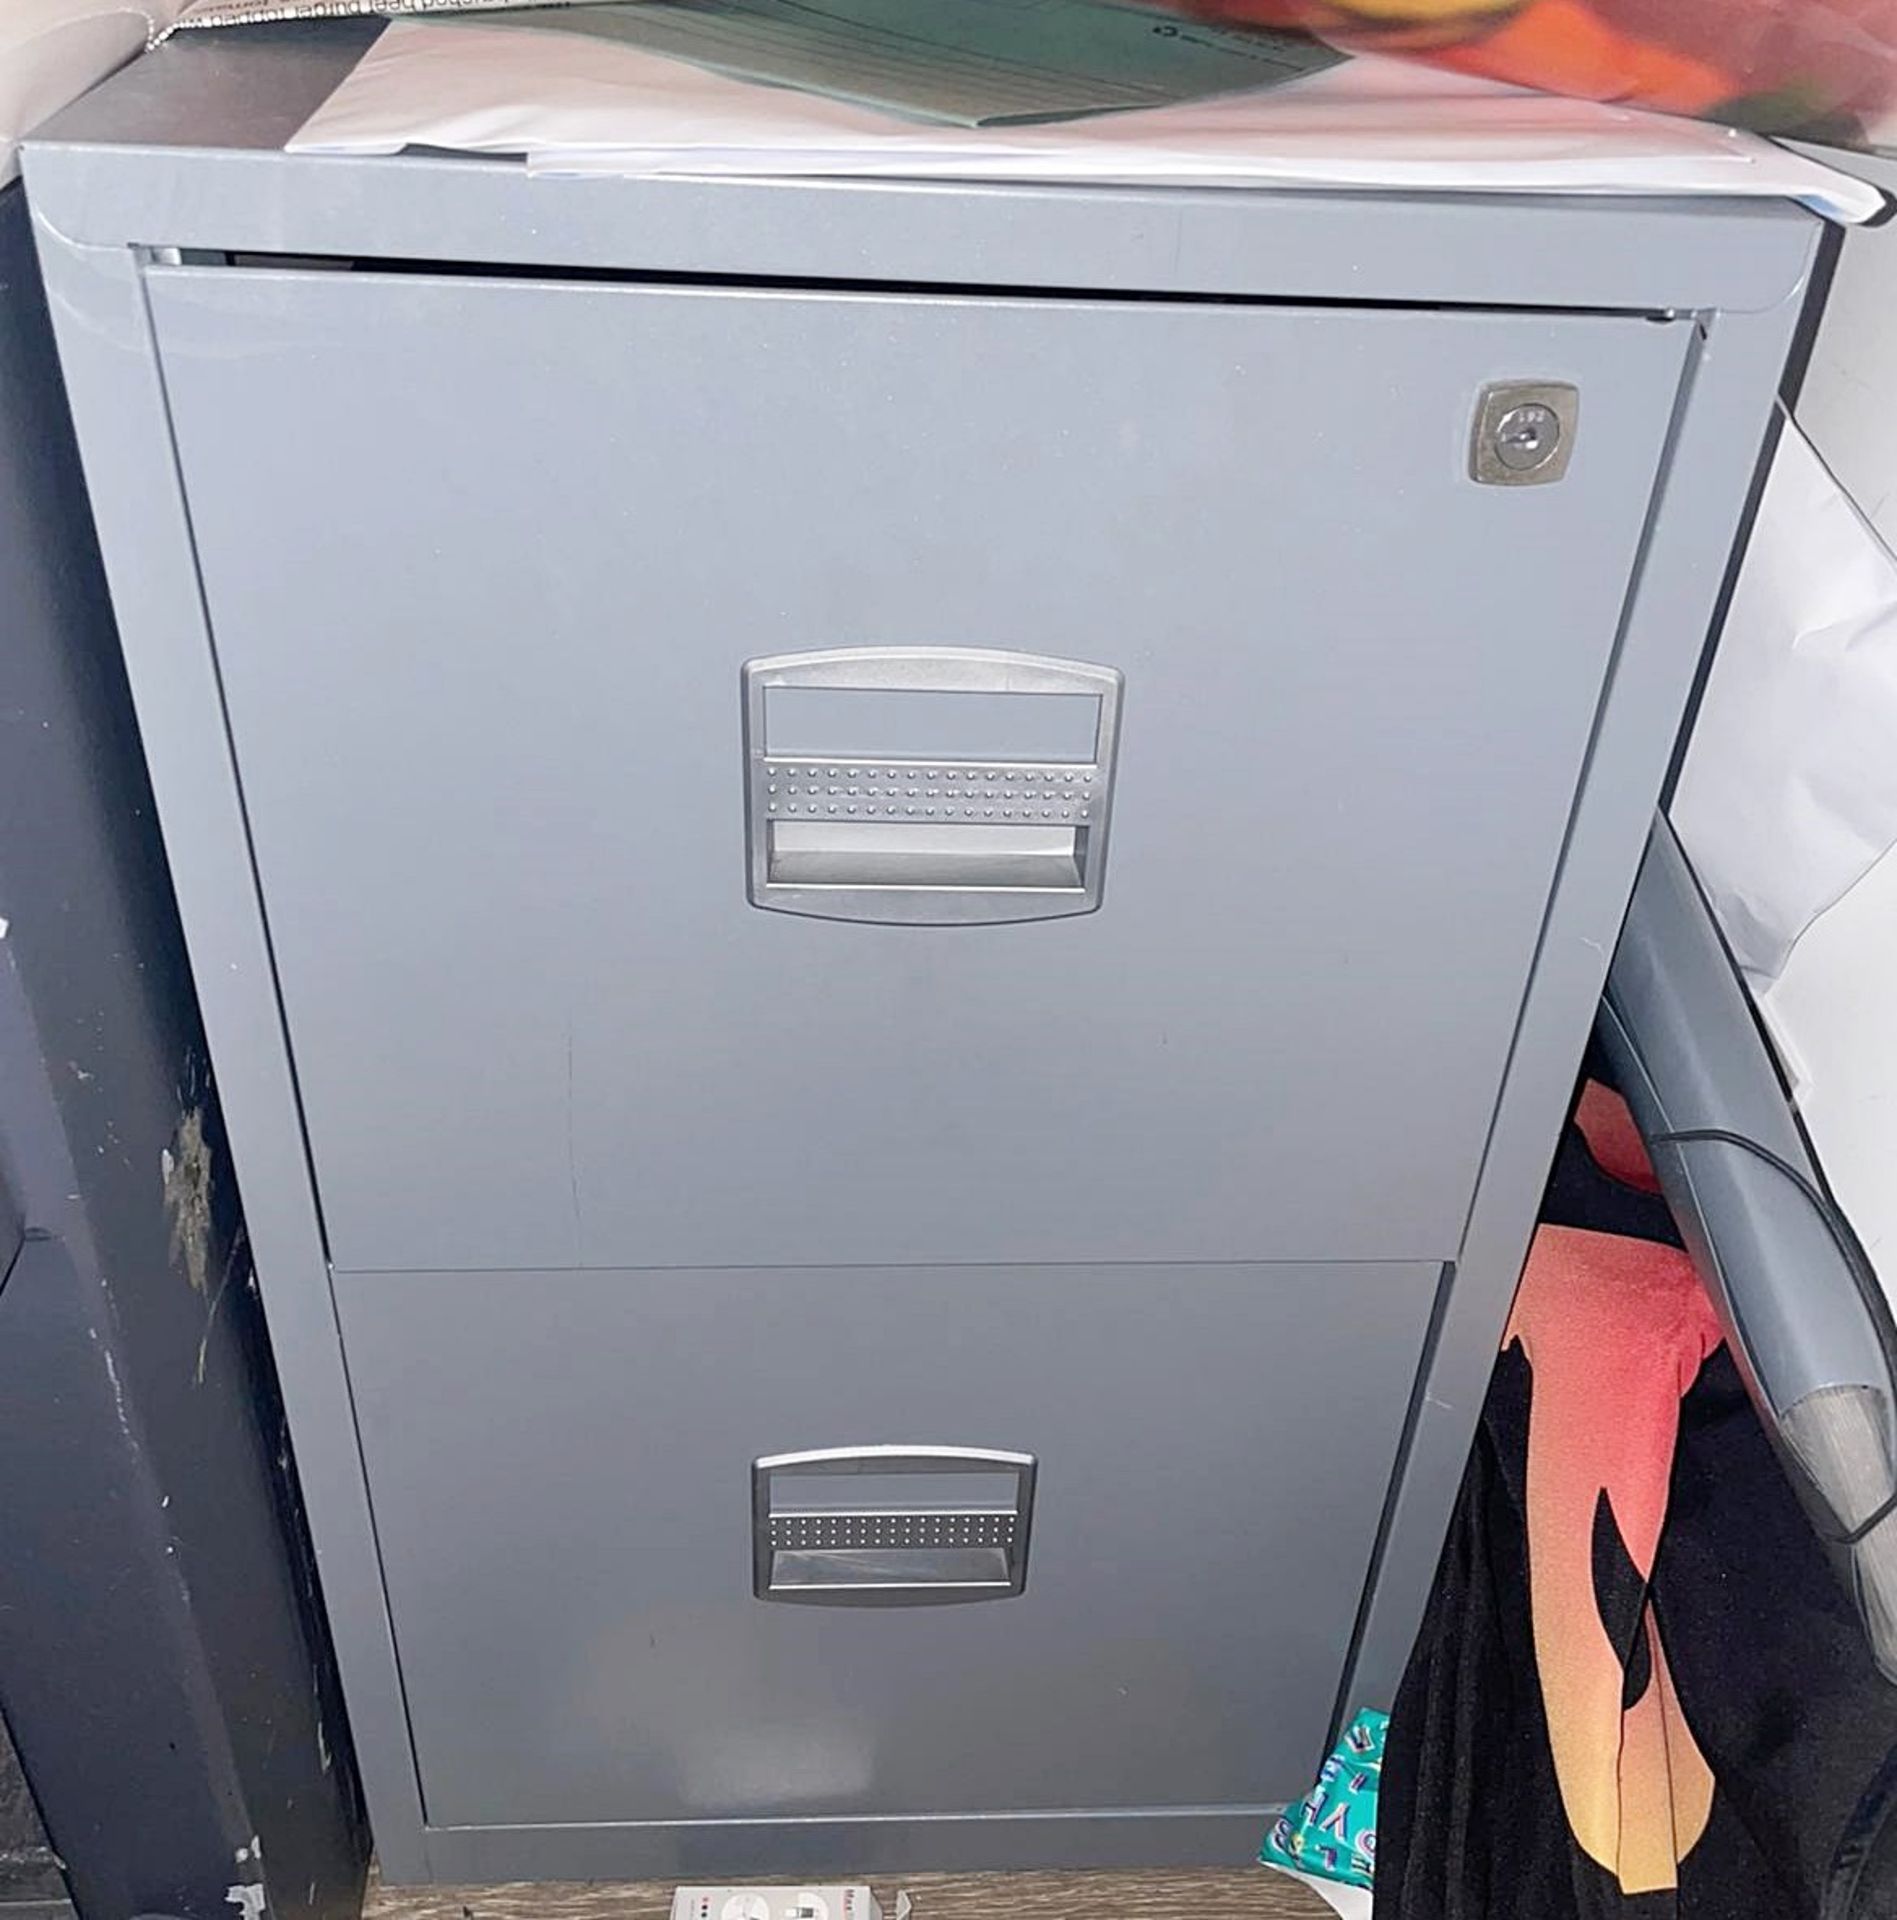 1 x Two Drawer Metal Filing Cabinet - CL674 - Location: Telford, TF3 Collections: This item is to be